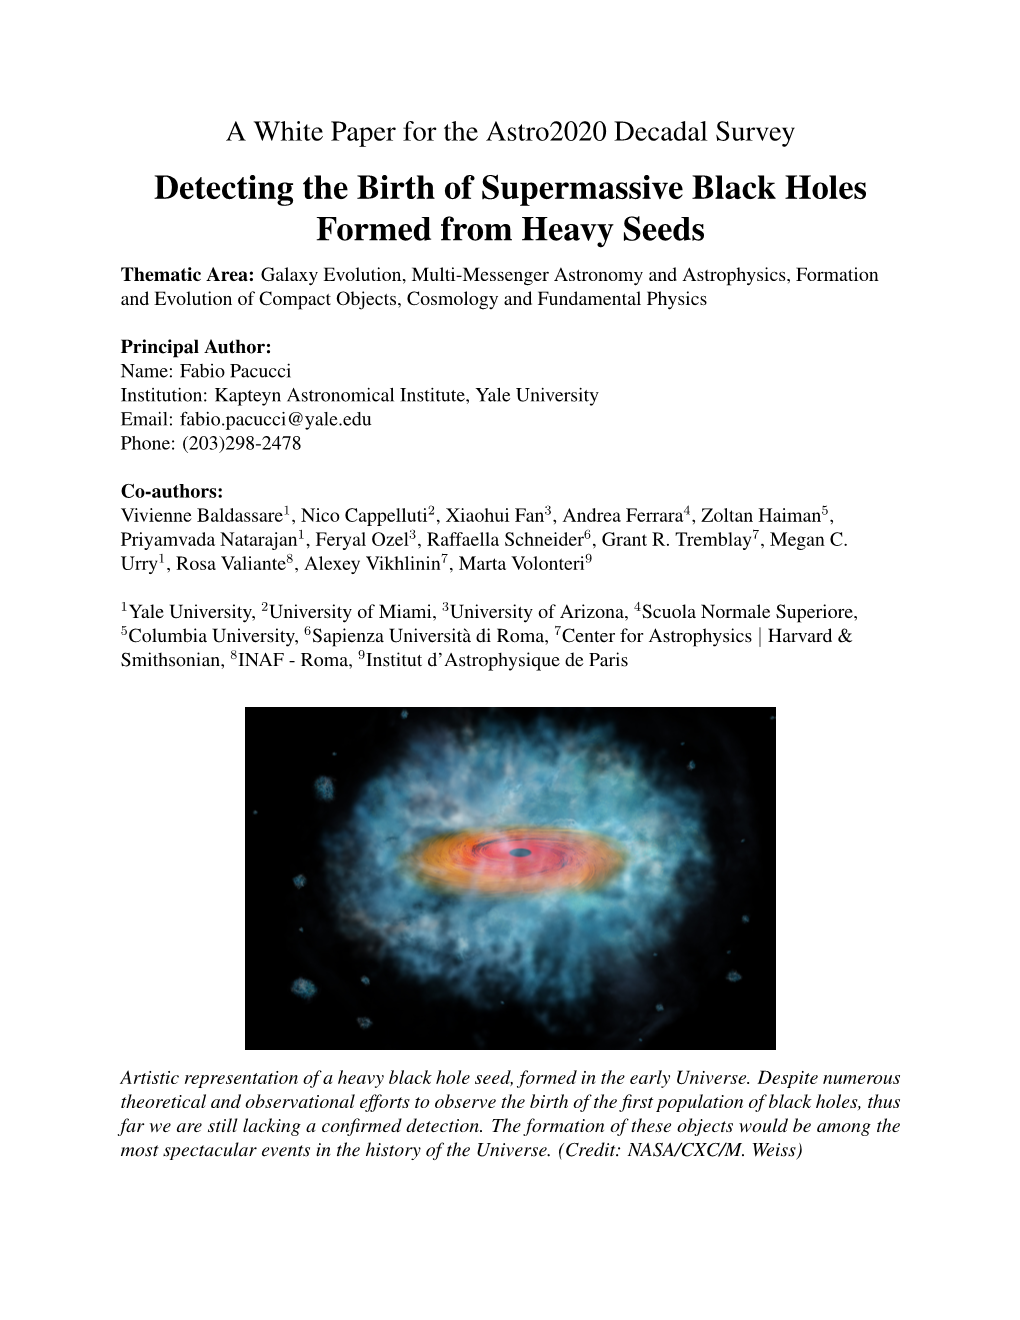 Detecting the Birth of Supermassive Black Holes Formed from Heavy